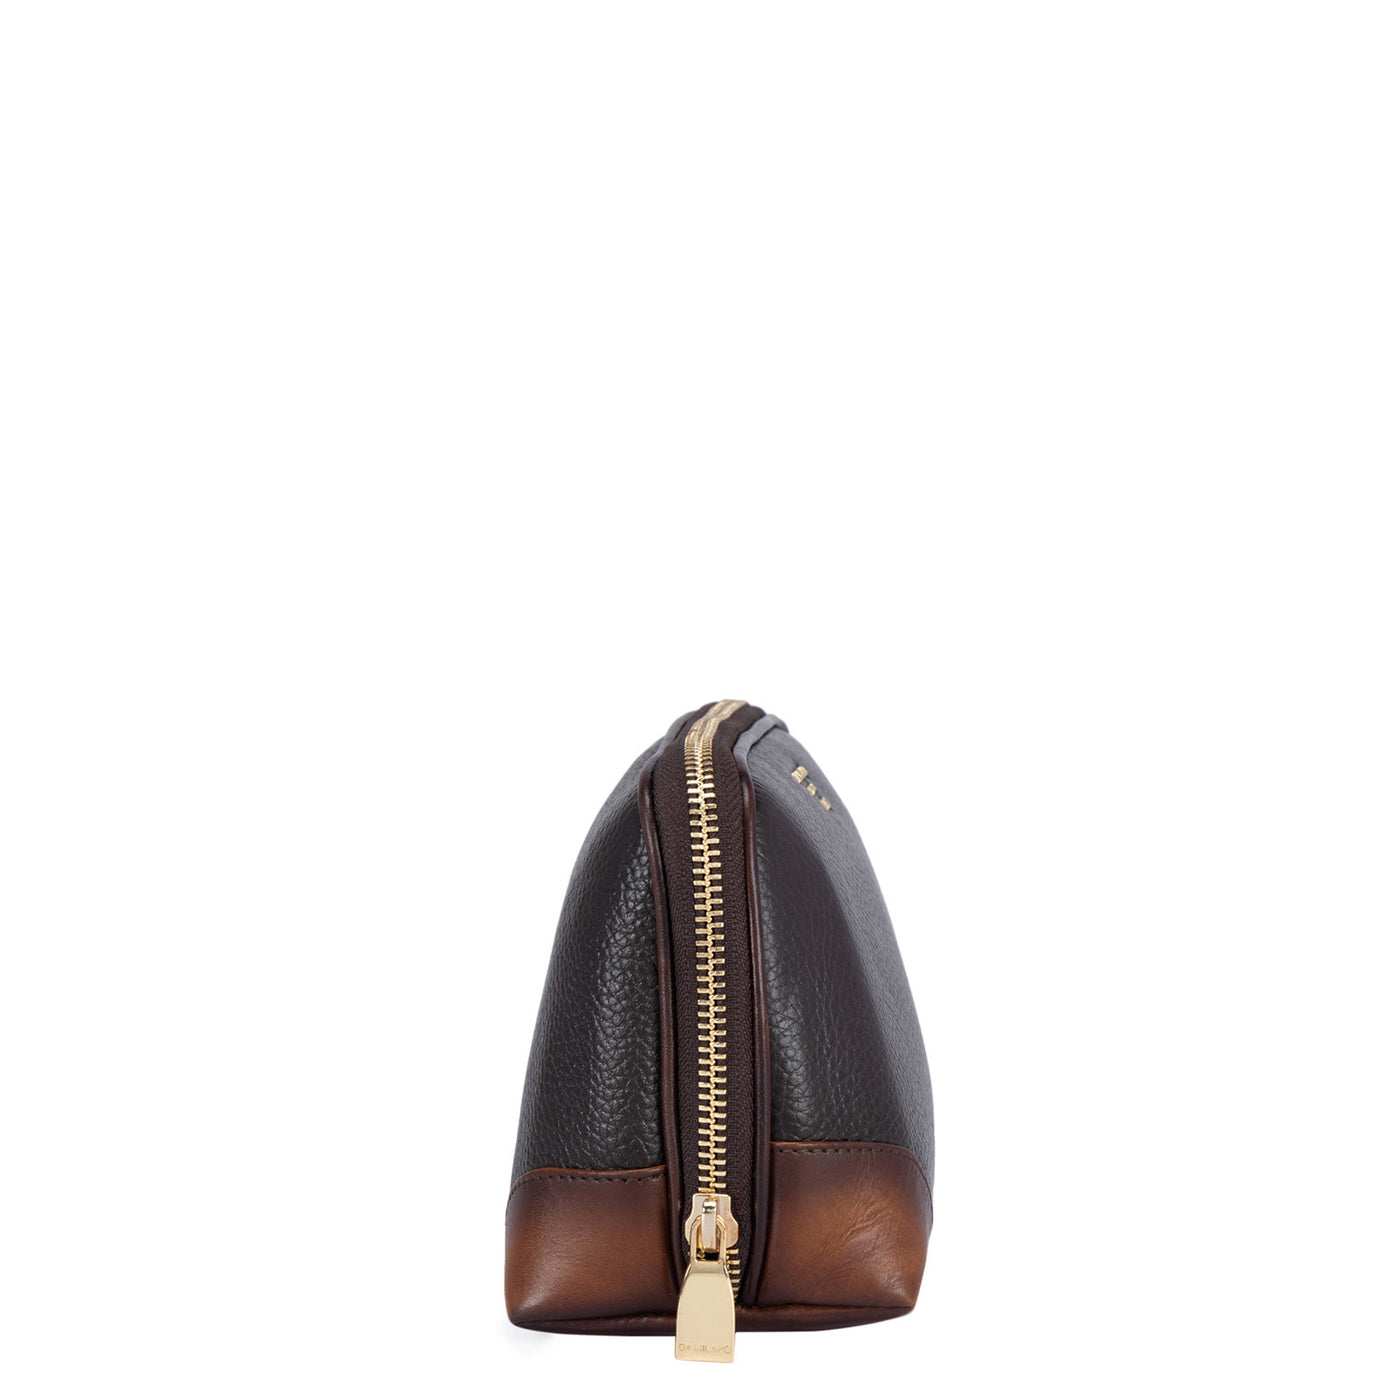 Wax Leather Multi Pouch - Chocolate